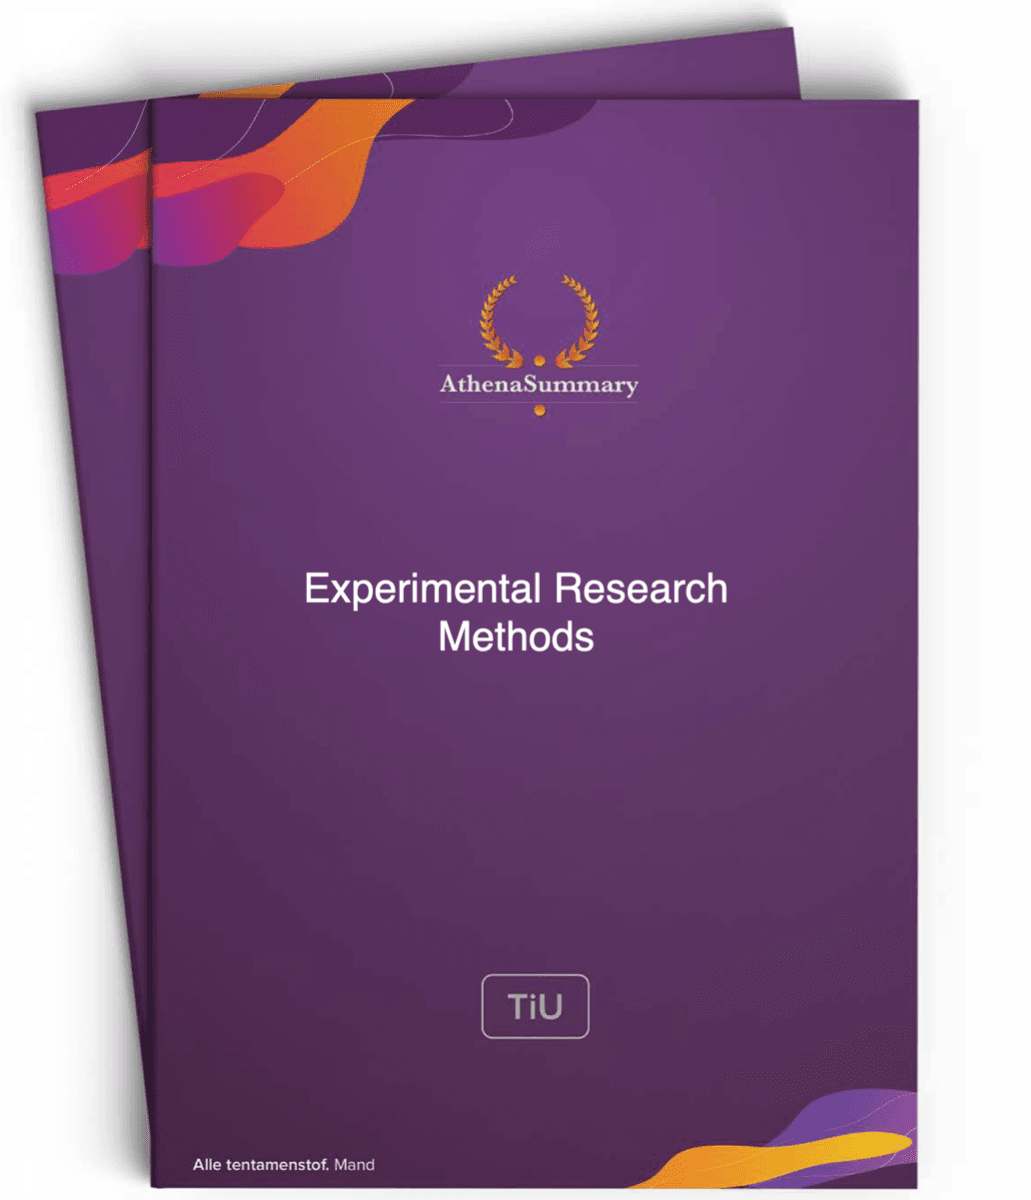 Literature & Lecture Summary: Experimental Research Methods